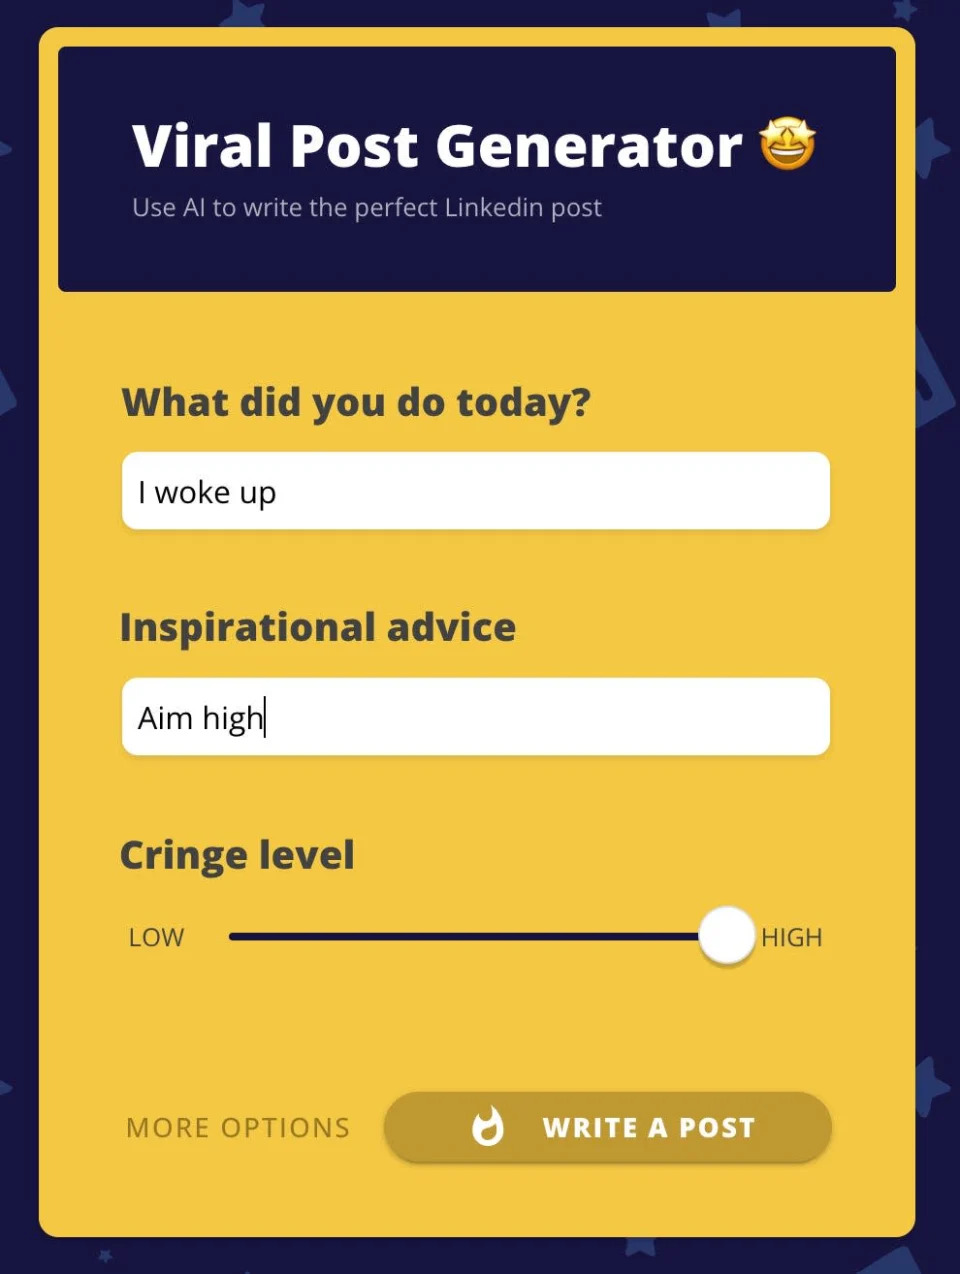 Viral Post Generator inputs showing "I woke up" under the question "What did you do today?" and "Aim high" under the prompt asking for Inspirational Advice, with the cringe level set to high